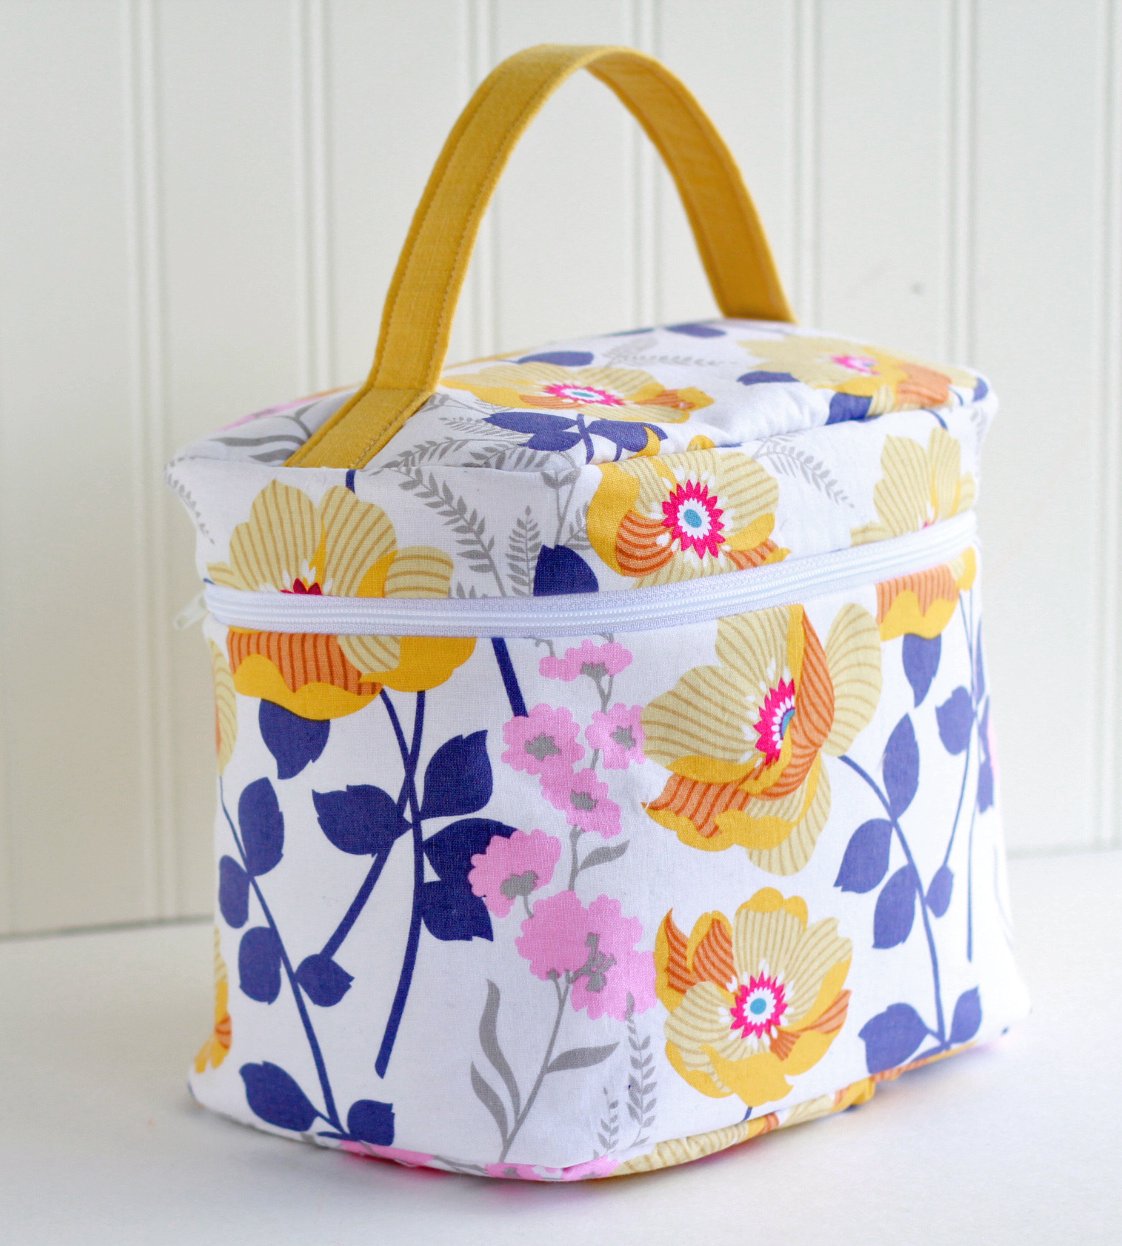 Image of Vintage Inspired Train Case PDF Sewing Pattern